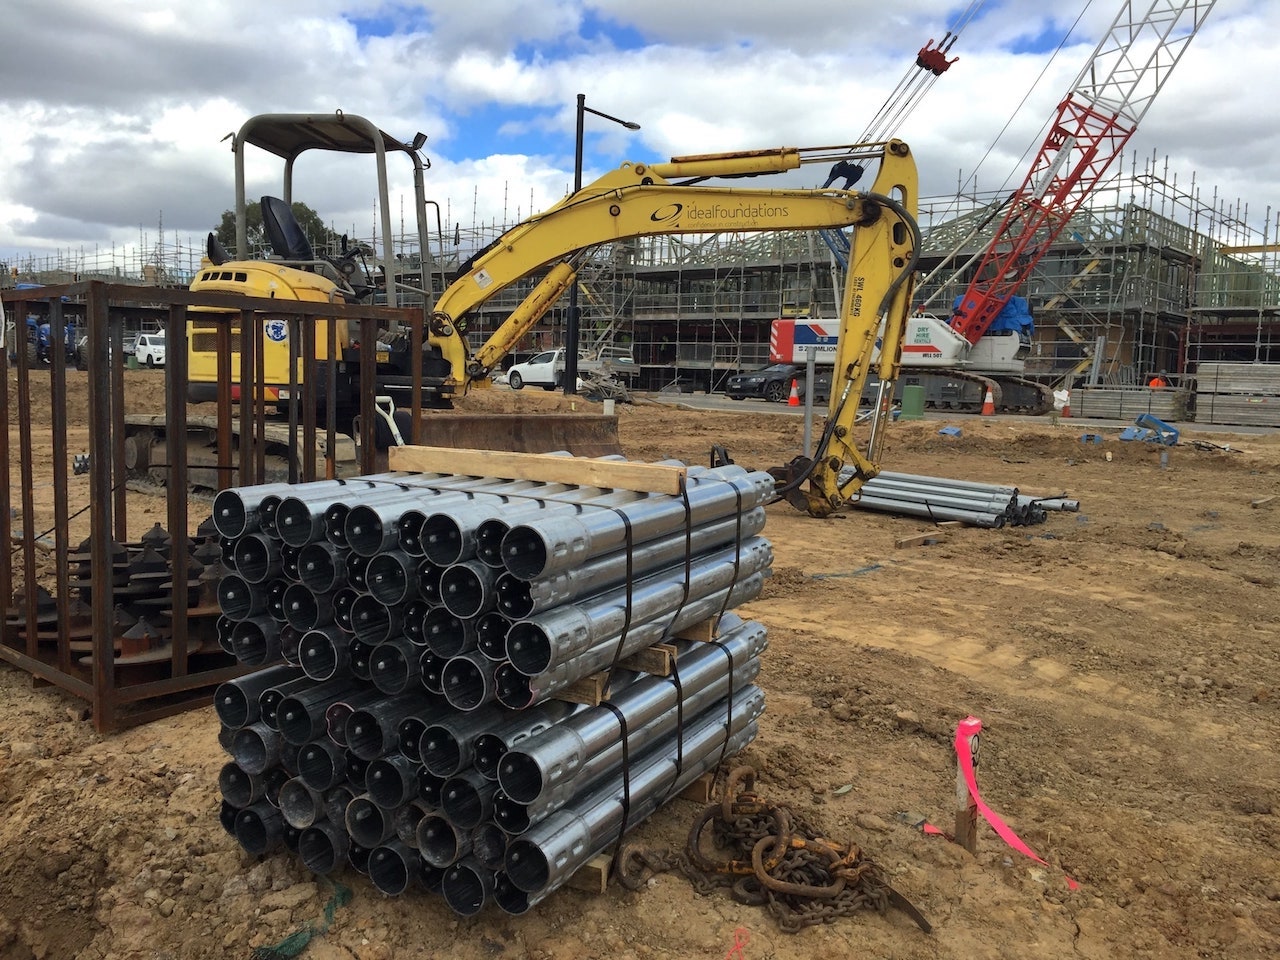 Ideal foundations screw piers being installed on Fairwater Development for Fraser Property